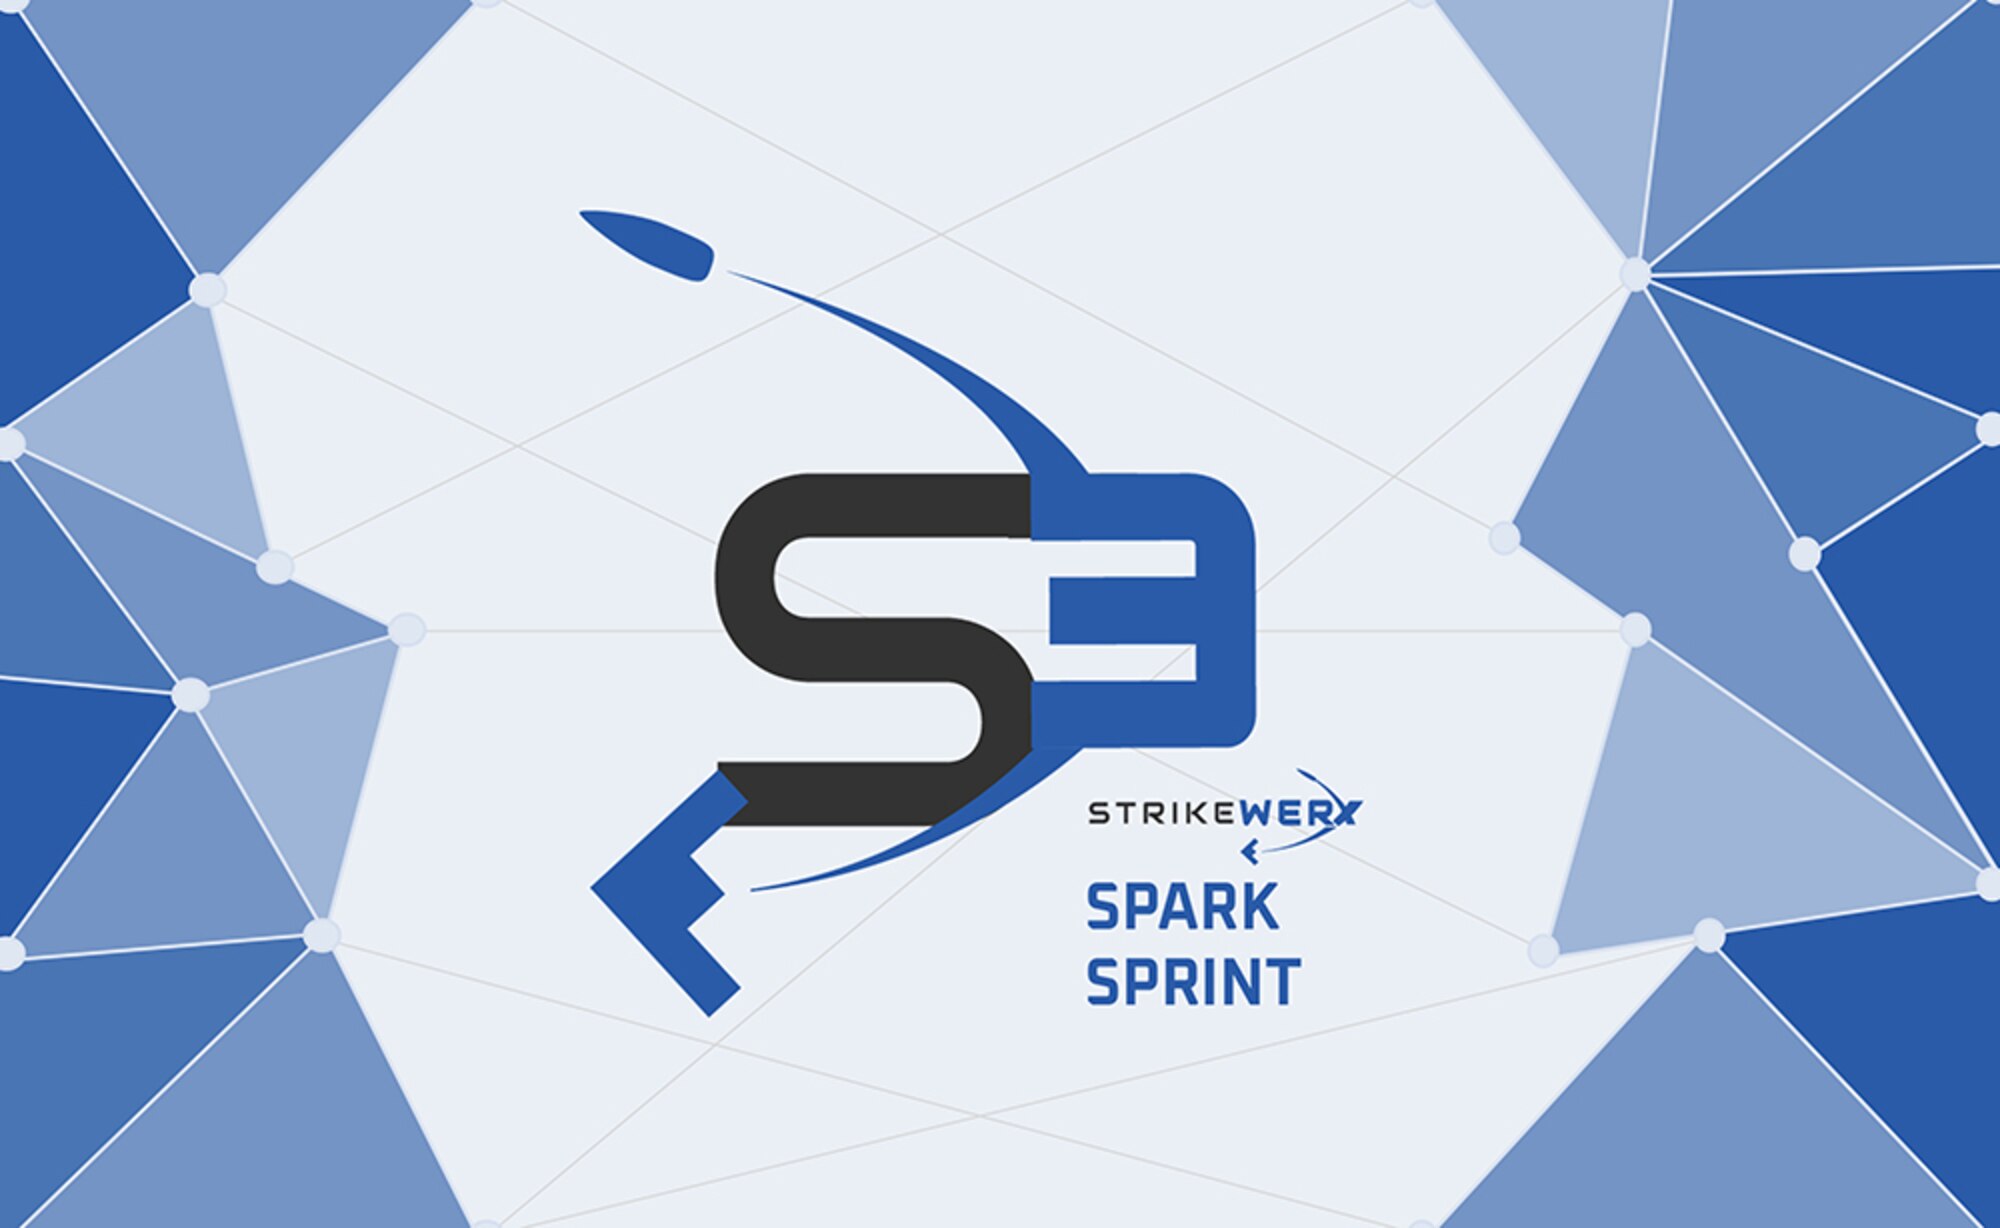 Known as S3, the STRIKEWERX Spark Sprint is Air Force Global Strike Command's competition to identify the best ideas from across the organization that will go on to represent the command during the 2021 Air Force Spark Tank competition.